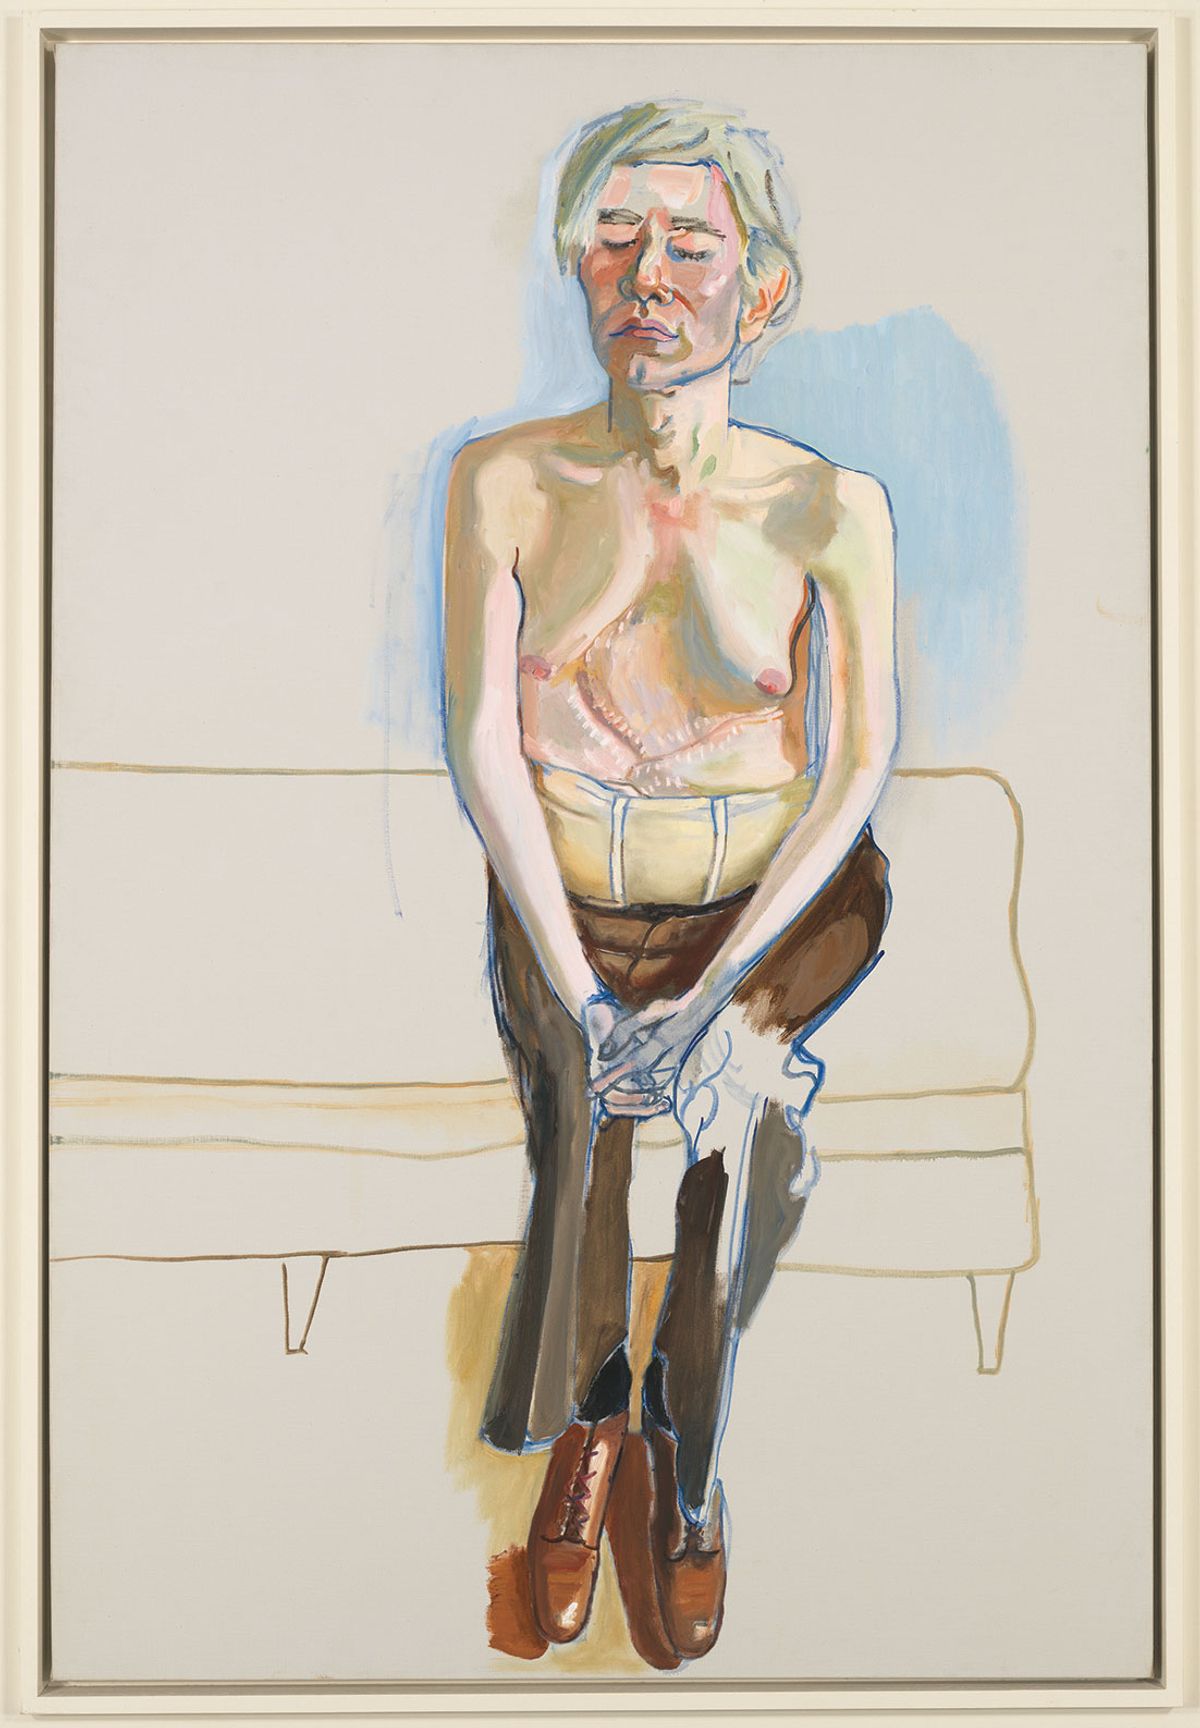 Andy Warhol, one of the many artist and activist contemporaries Neel painting when living in New York. Estate of Alice Neel; Photo: ©  Whitney Museum of American Art/Licensed by Scala